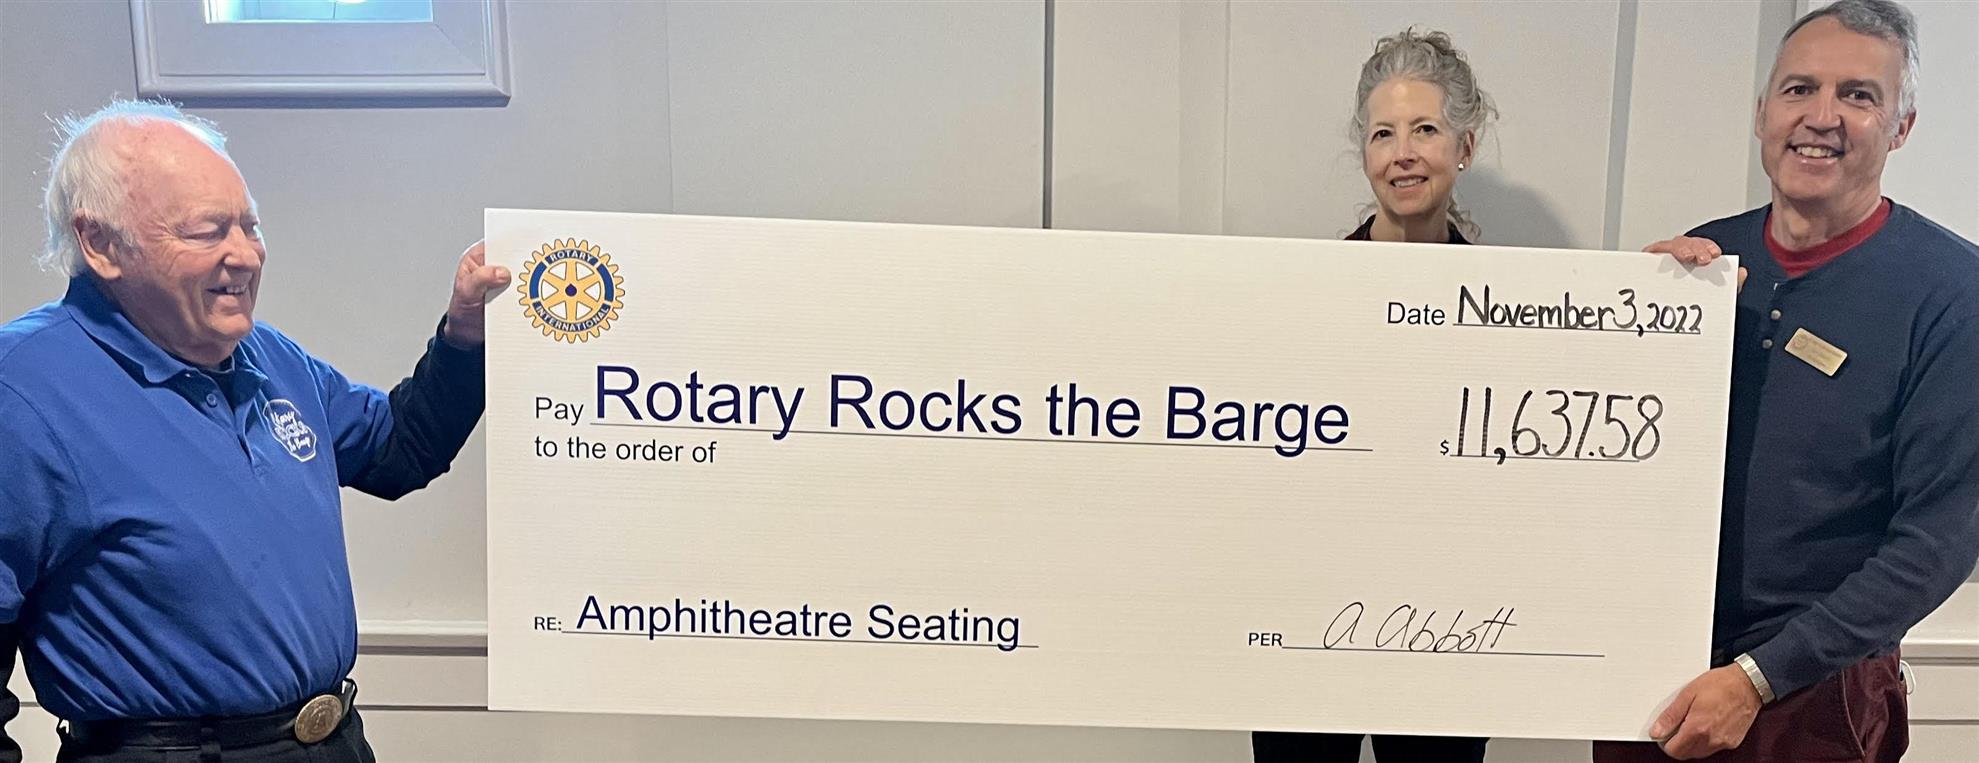 Abbott's Donation to Rotary Rocks the Barge